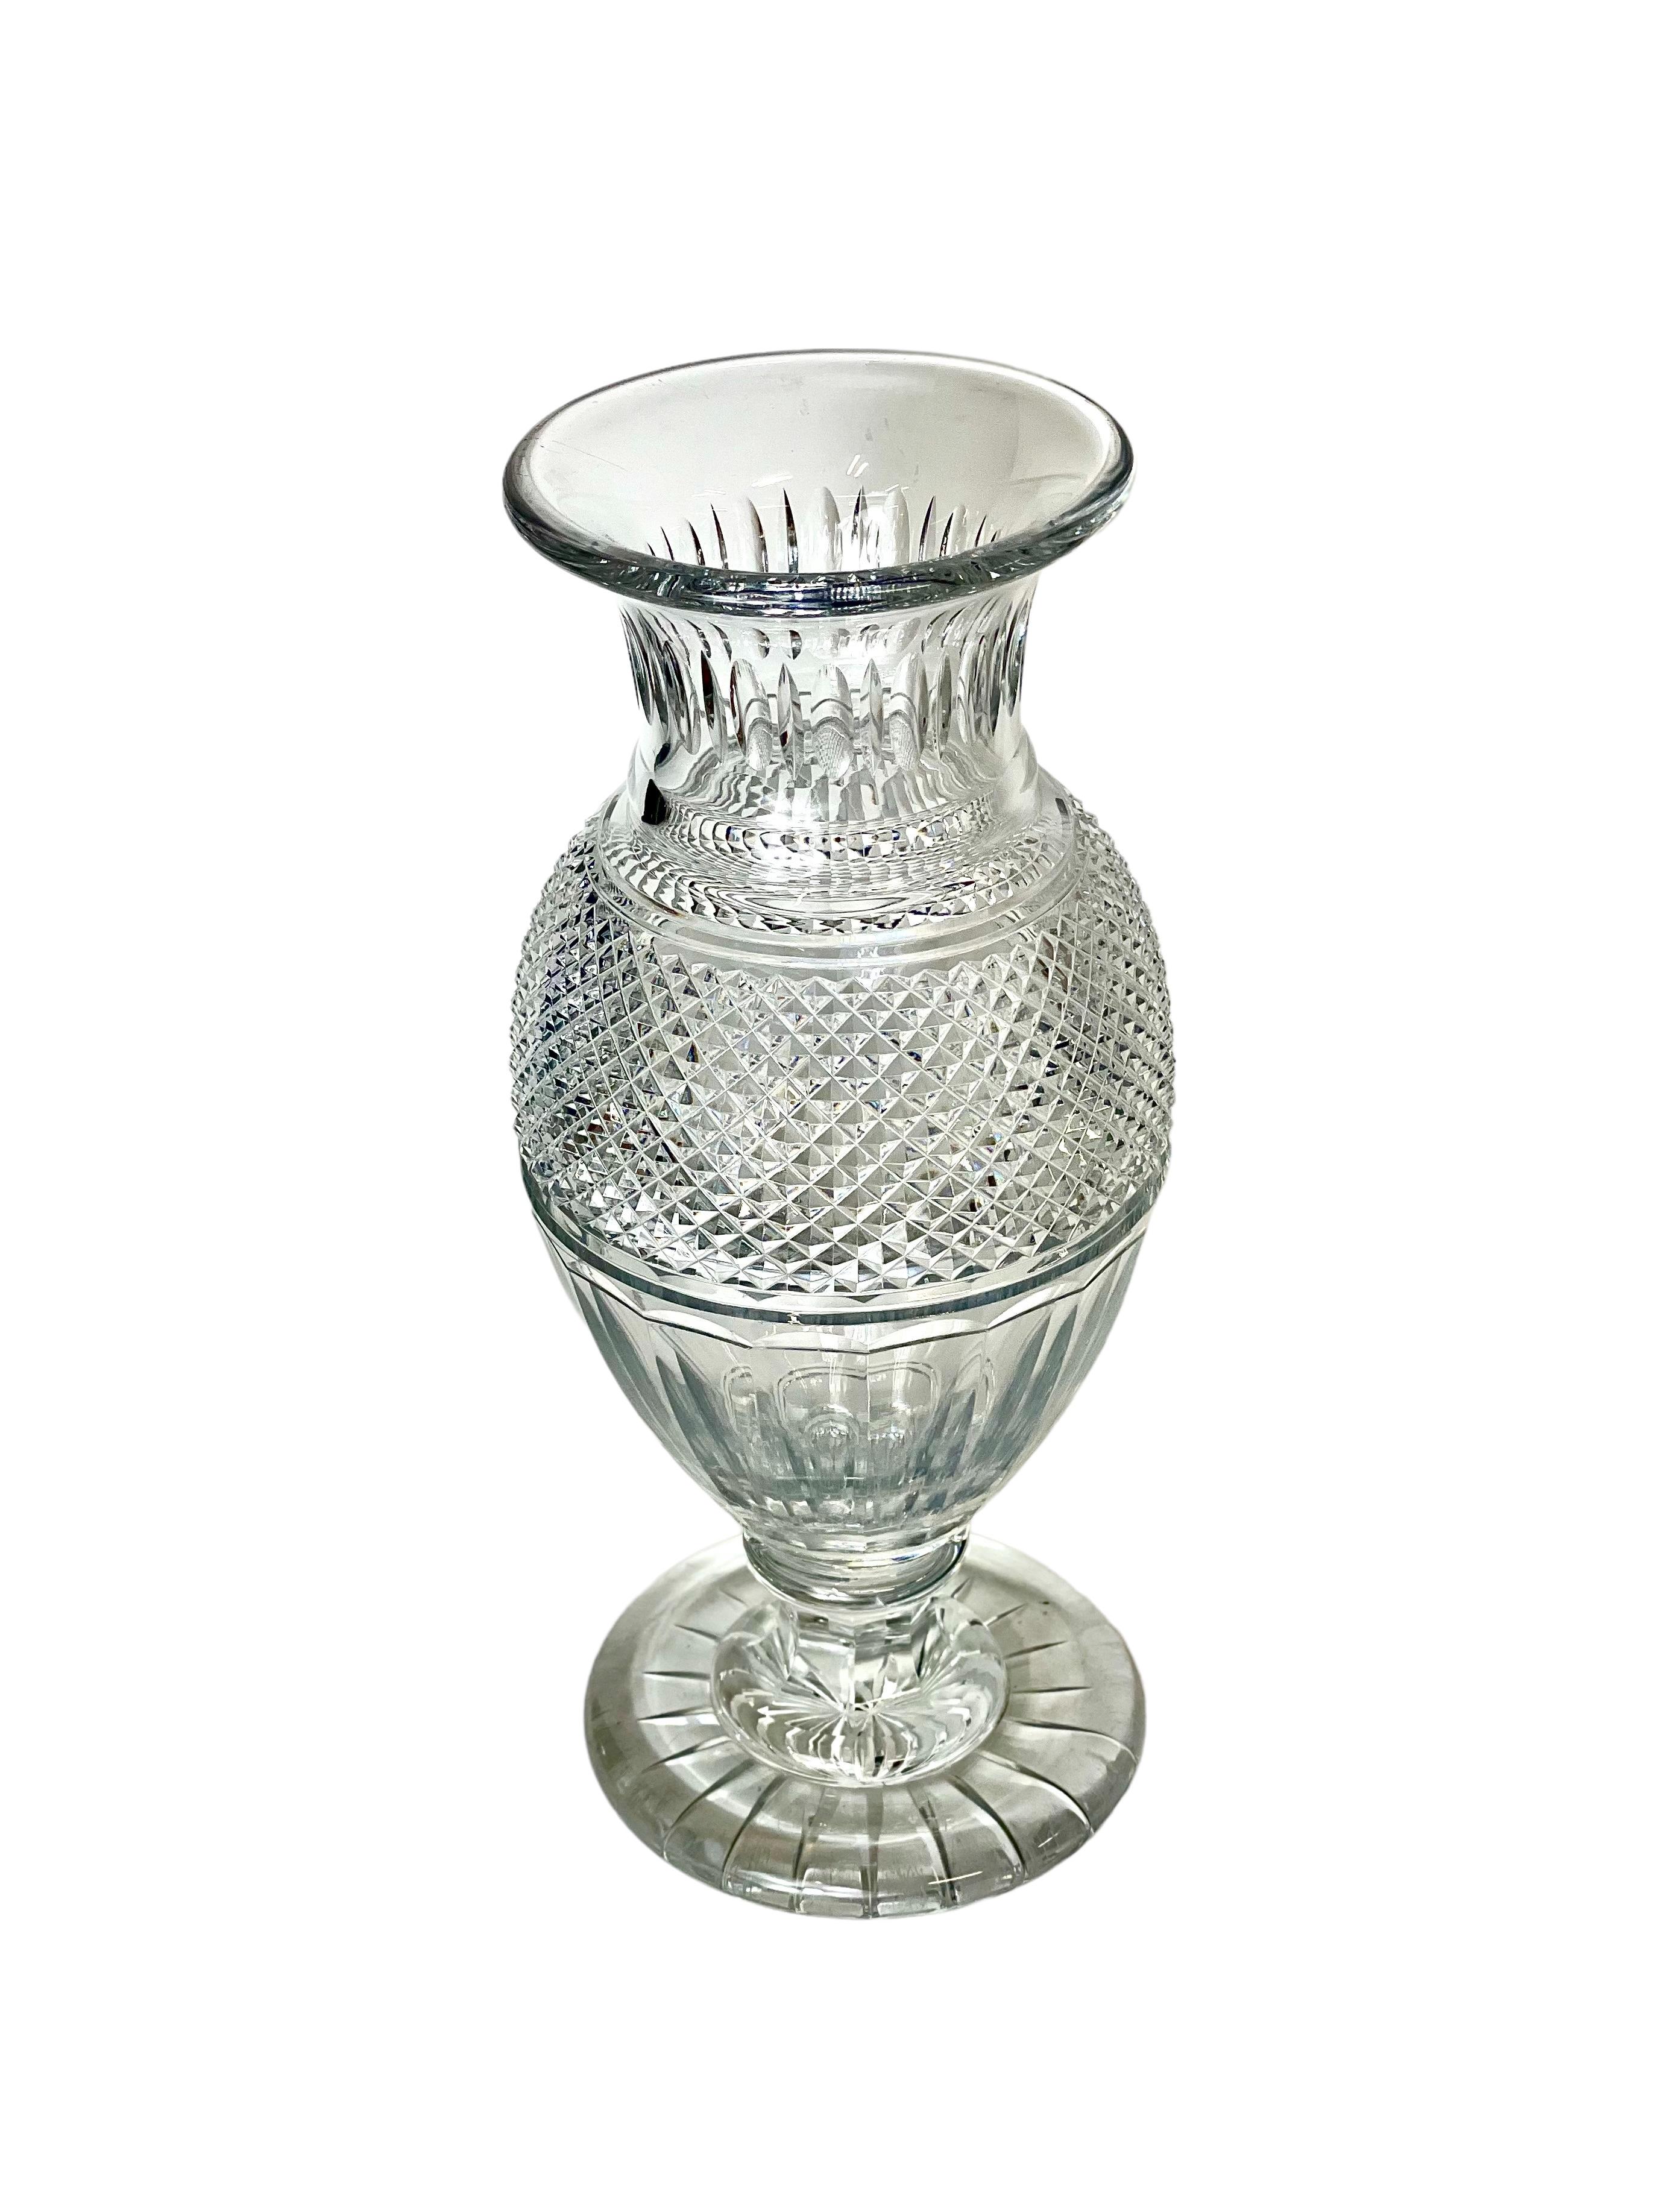 A slender and timeless Baccarat Musée des Cristalleries vase, cut with a broad band of fine diamonds on the upper section, with vertical flutes below, resting on a circular star-cut foot. This glittering vase is a beautiful example of Baccarat